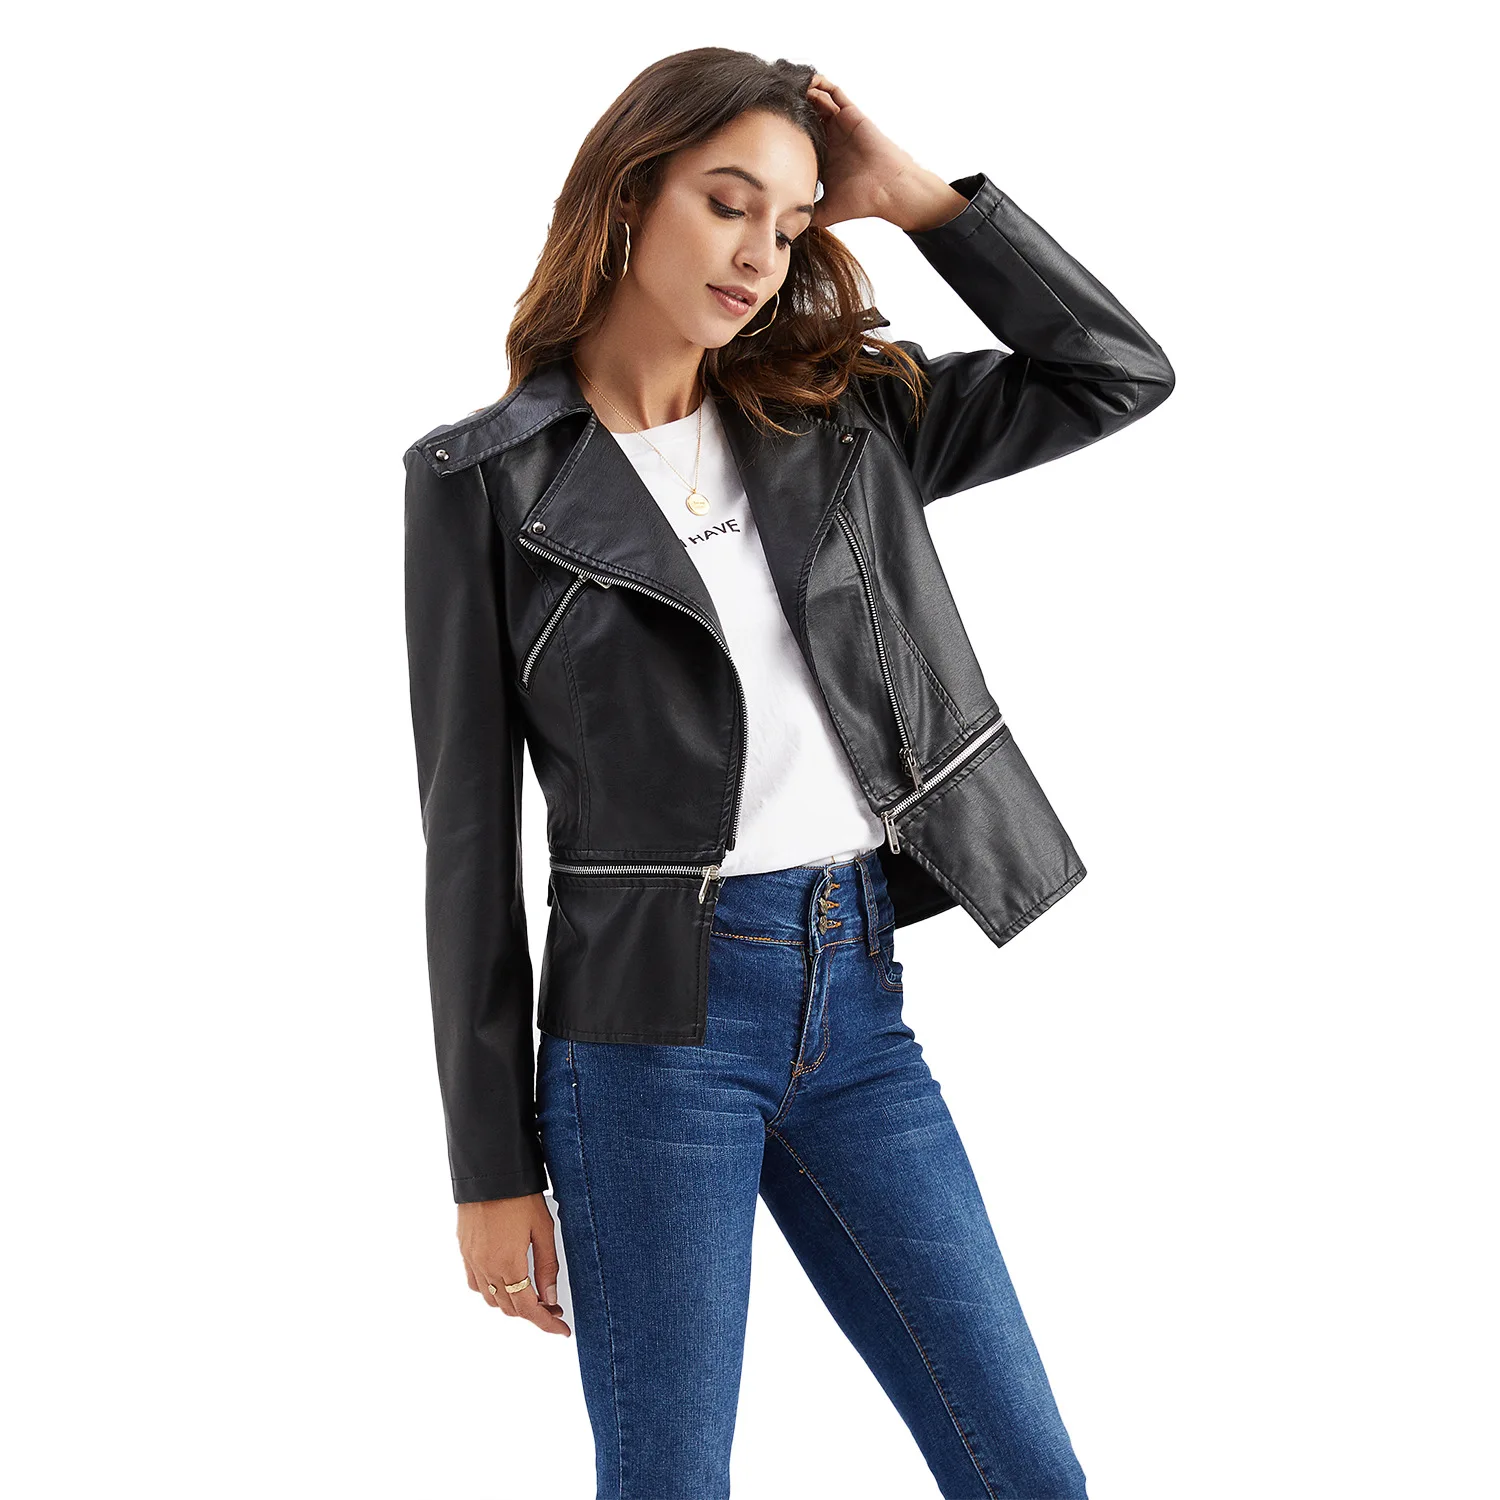 Women's Leisure Hem Detachable Leather Jacket, Spring and Autumn Coat, European and American Fashion, High-Quality Lapel Zipper, european and american checkerboard tooling baseball uniform female spring and autumn thin loose retro high street jacket jacket